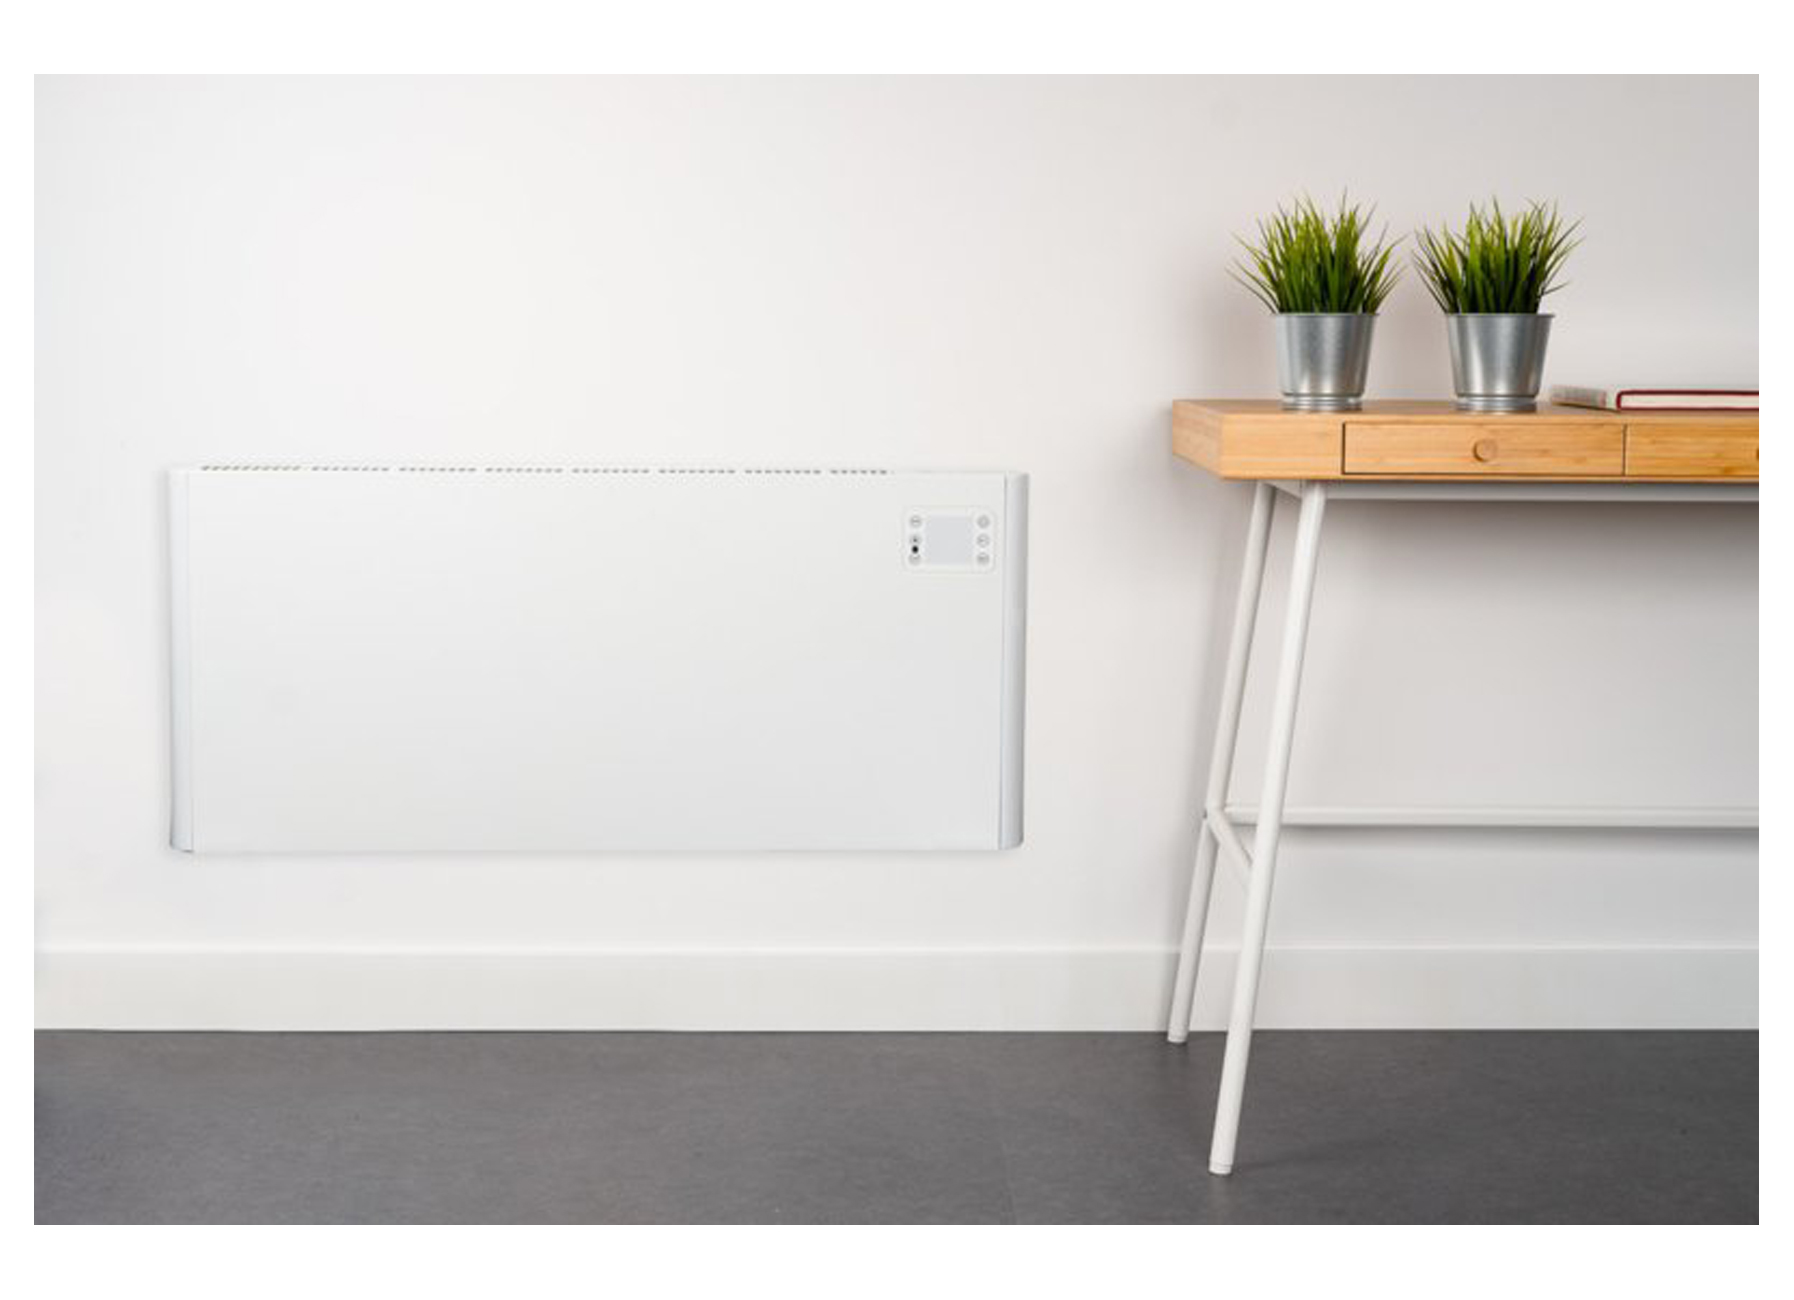 EUROM CONVECTOR ALUTHERM WIFI TC 2500W